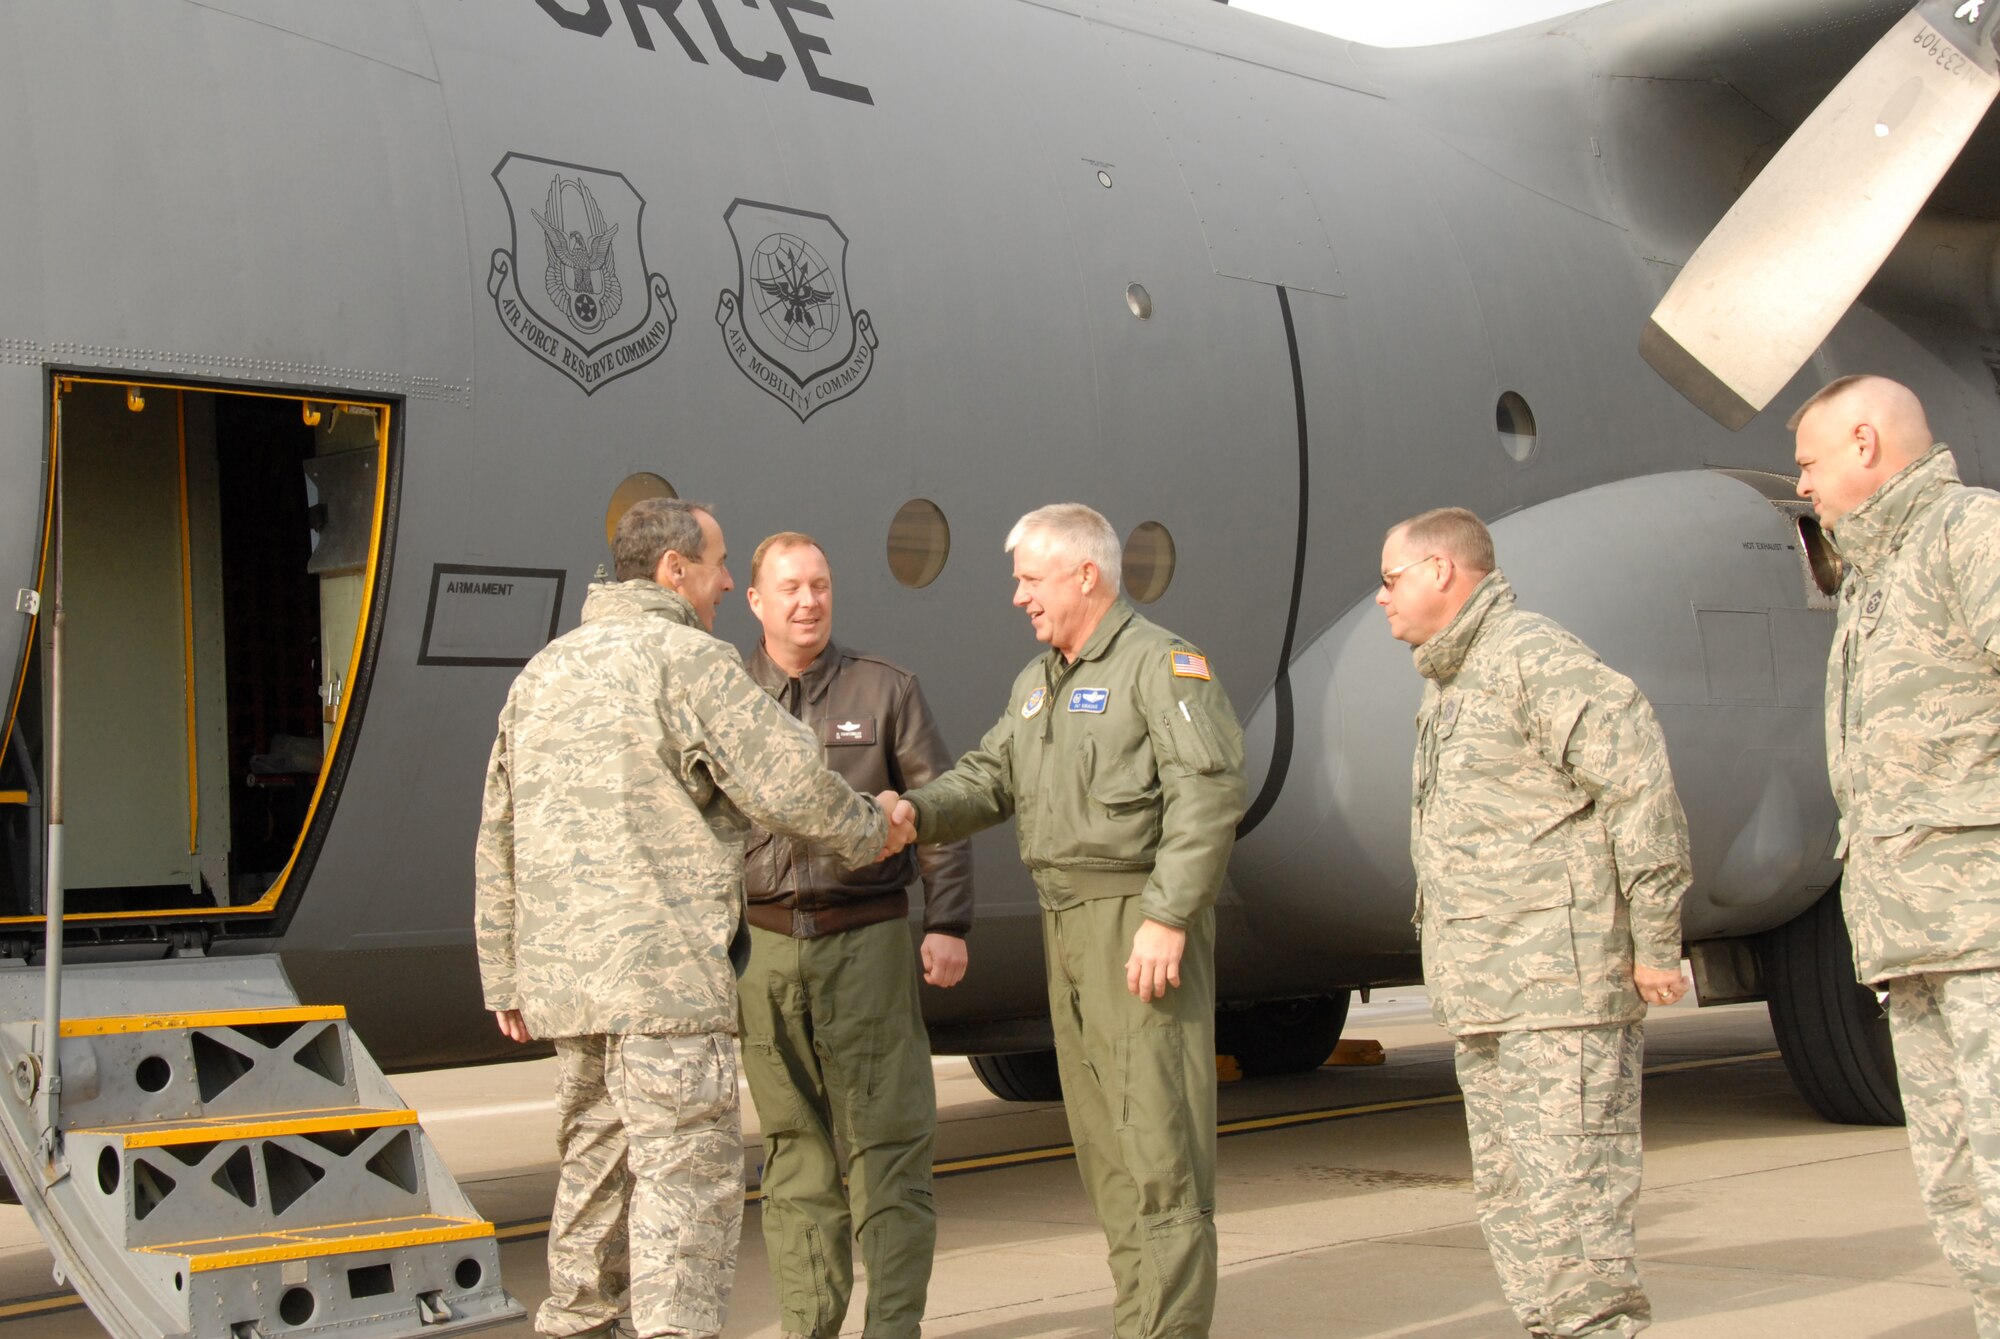 The new Air Mobility Commander, Gen. Raymond Johns, Jr. is greeted by the commanders of the Niagara Falls Air Reserve Station. Niagara was one of the numerous stop the general has made during his tour of Air Force Bases under his command.  Above: Col. Patrick Ginavan, 107th AW, Commander, welcomes the general to Niagara. To the left of the colonel is Col. Allan Swartzmiller, 914th AW, Commander, to the right is Chief Master Sgt. Scott Scharlau, 914th AW, Command Chief and Chief Master Sgt. Richard King, 107th AW, Command Chief. (U.S. Air Force Photo/Senior Master Sgt. Ray Lloyd) 